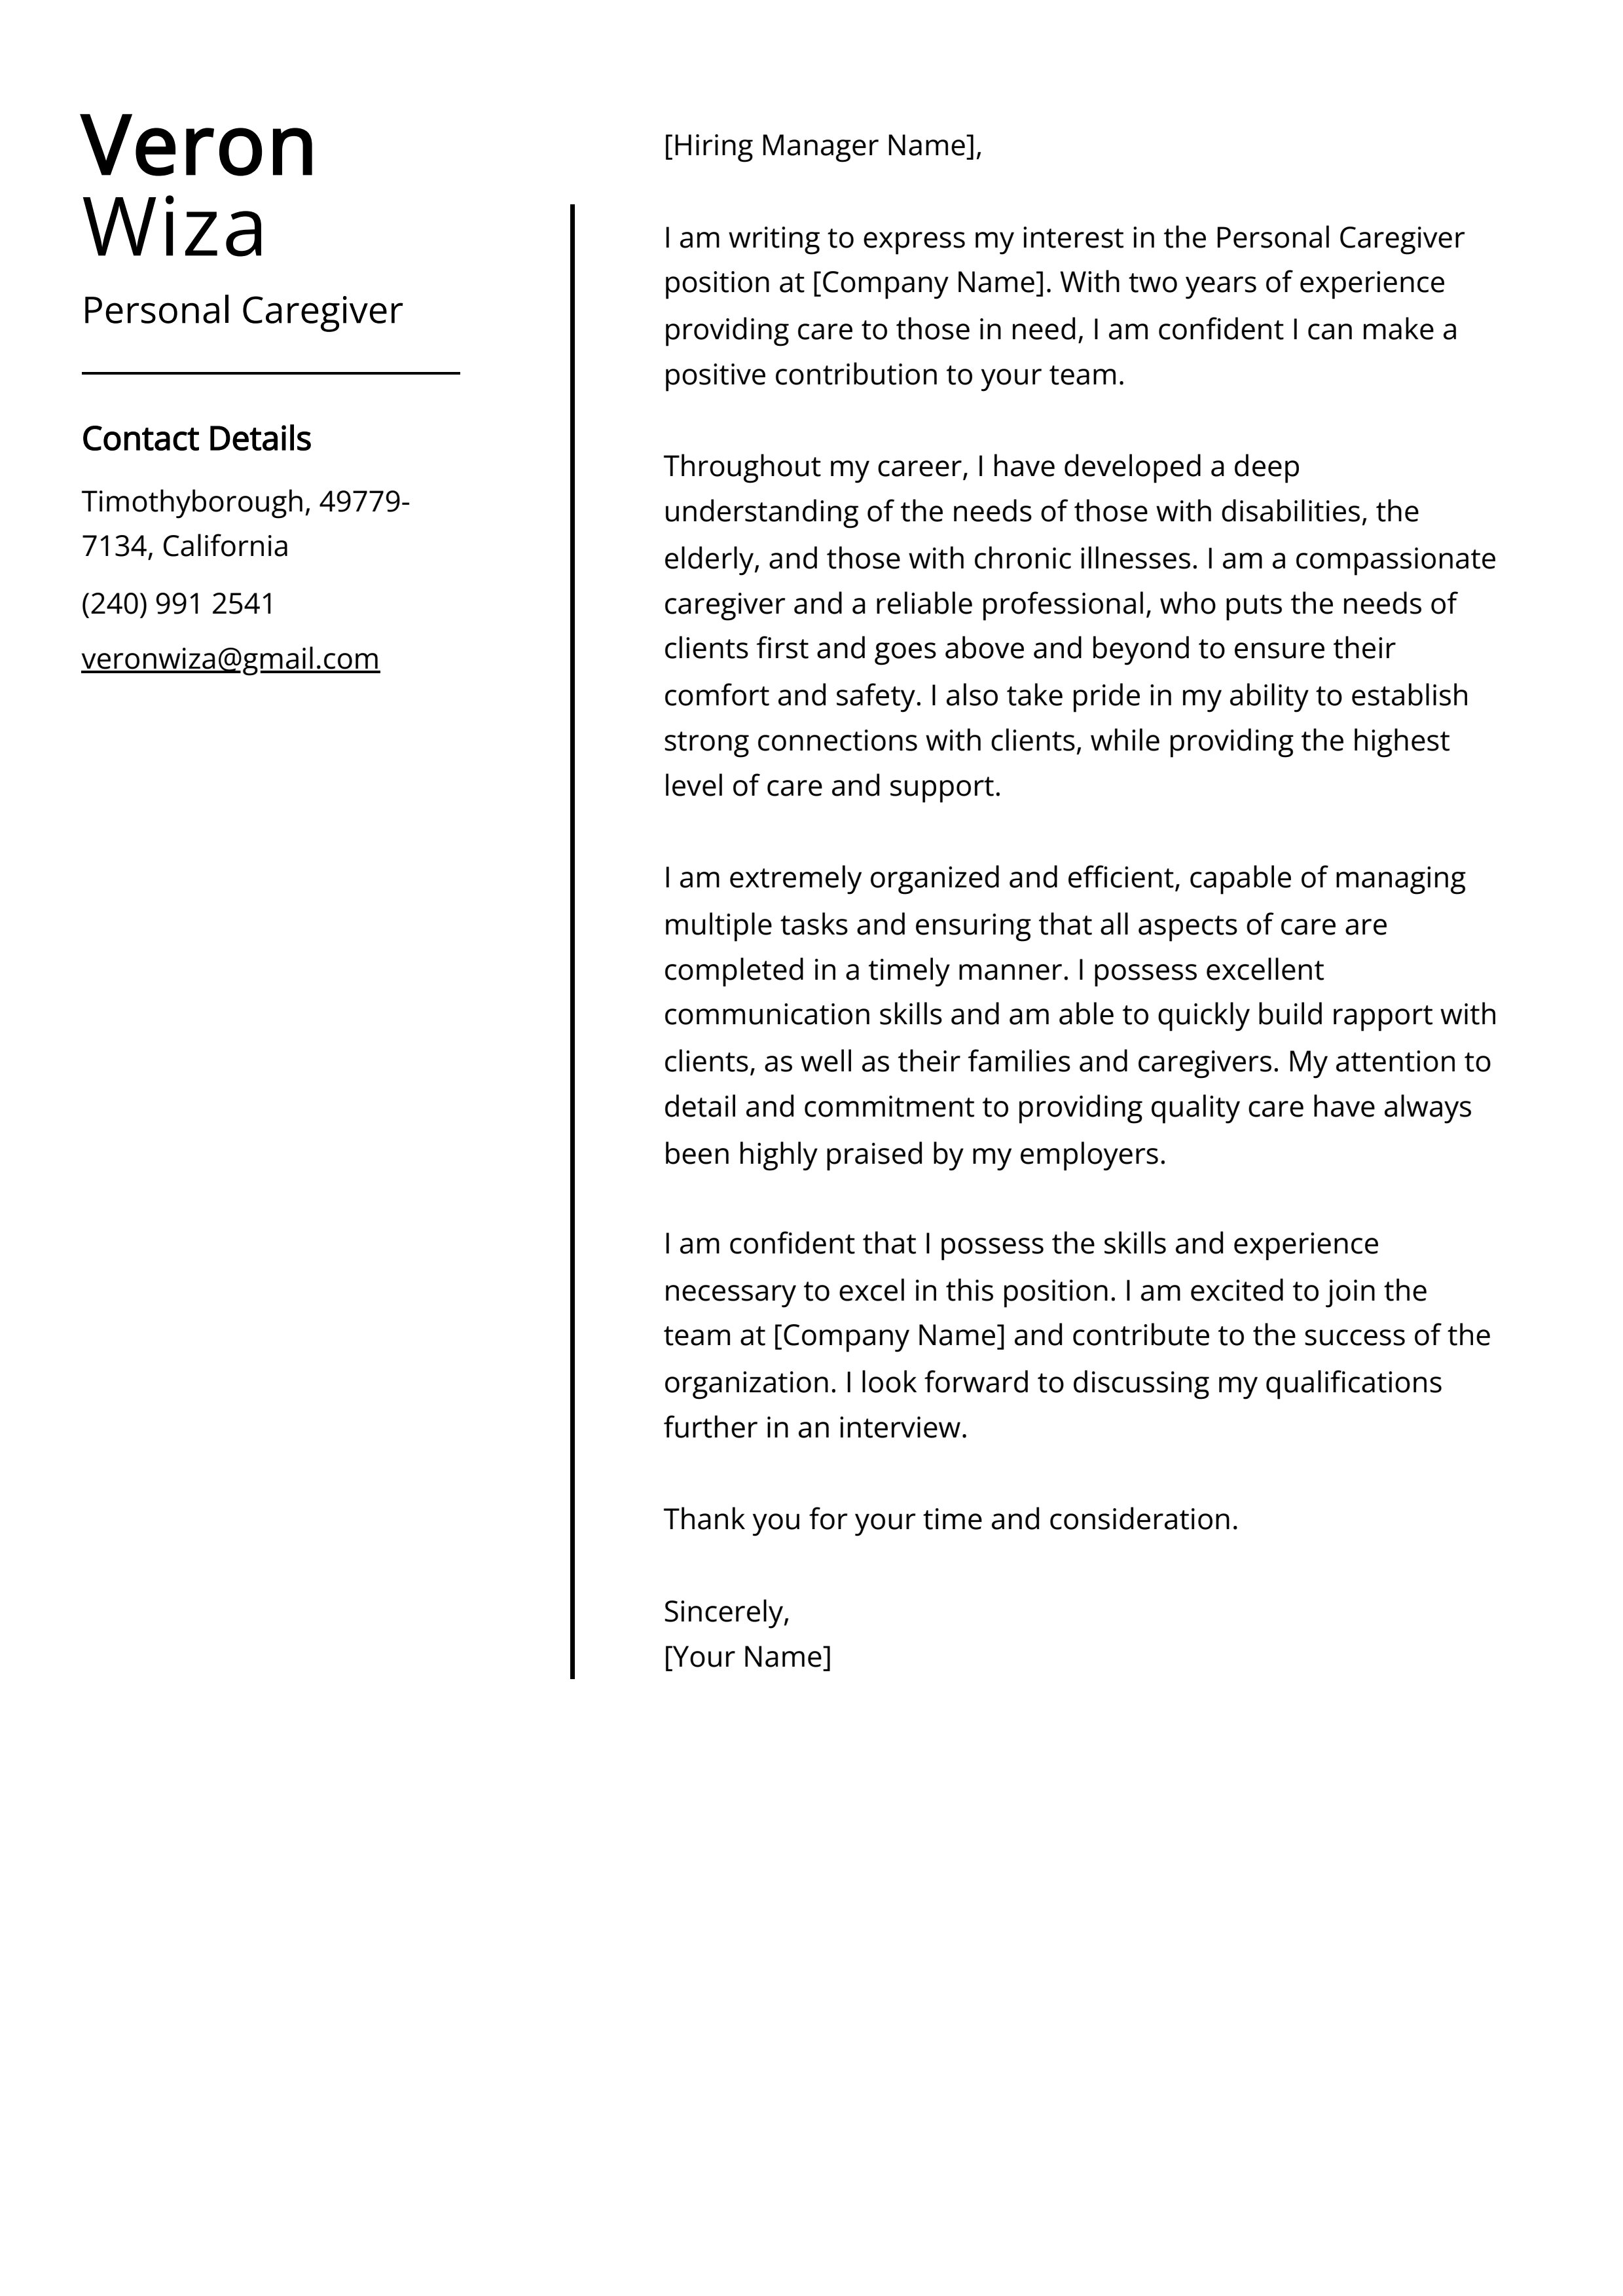 Personal Caregiver Cover Letter Example